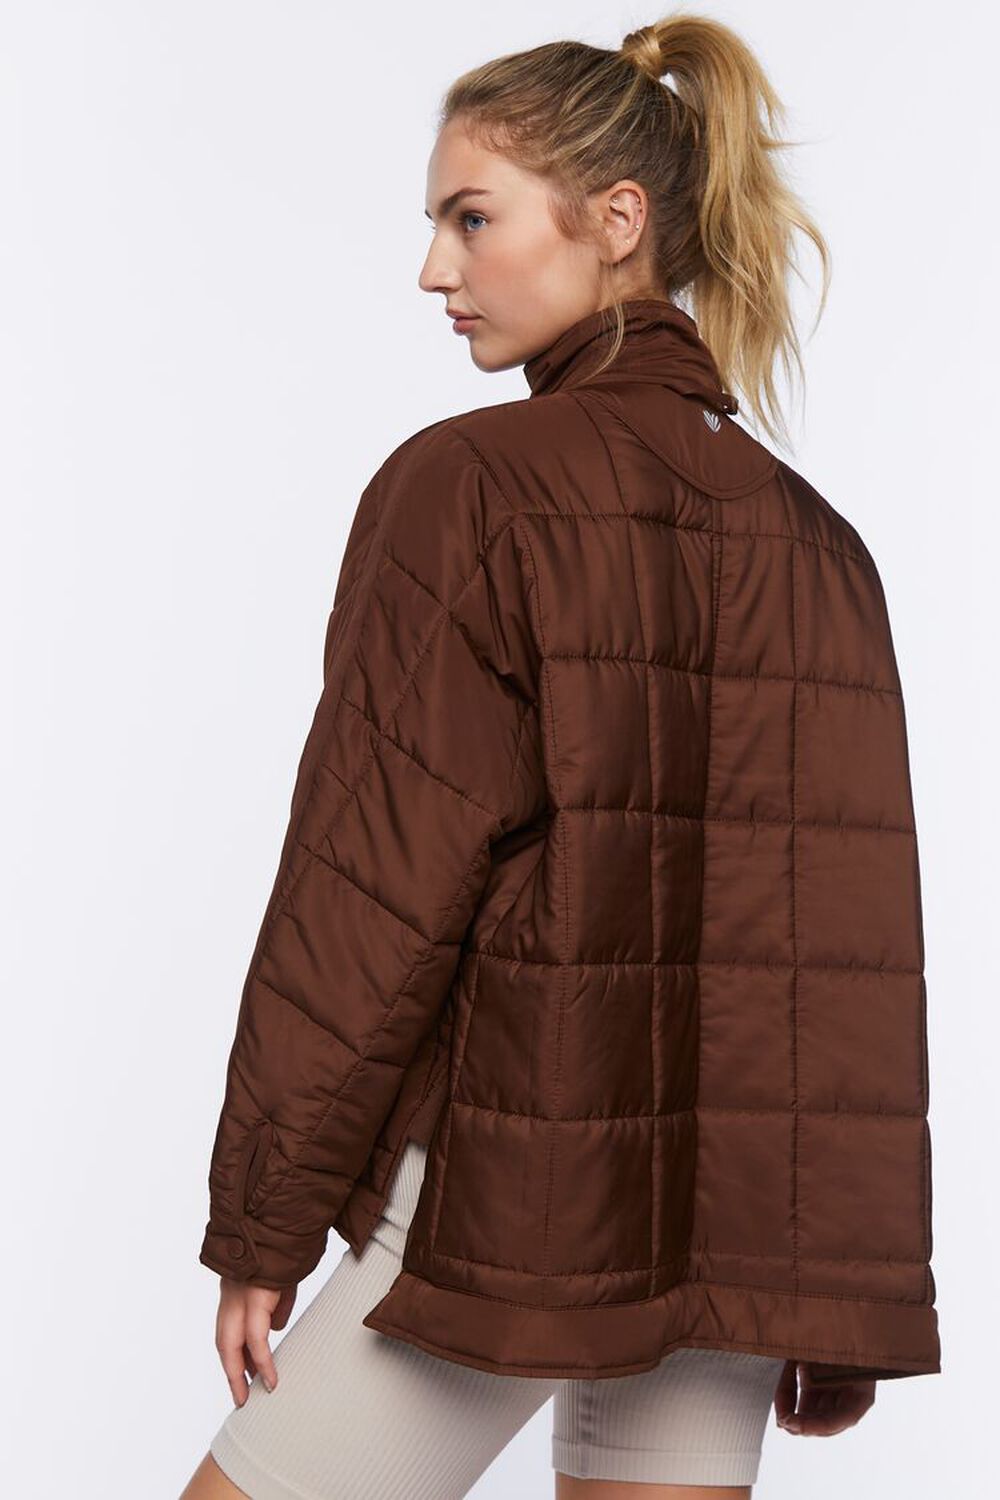 TURKISH COFFEE Active Quilted Puffer Jacket, image 3